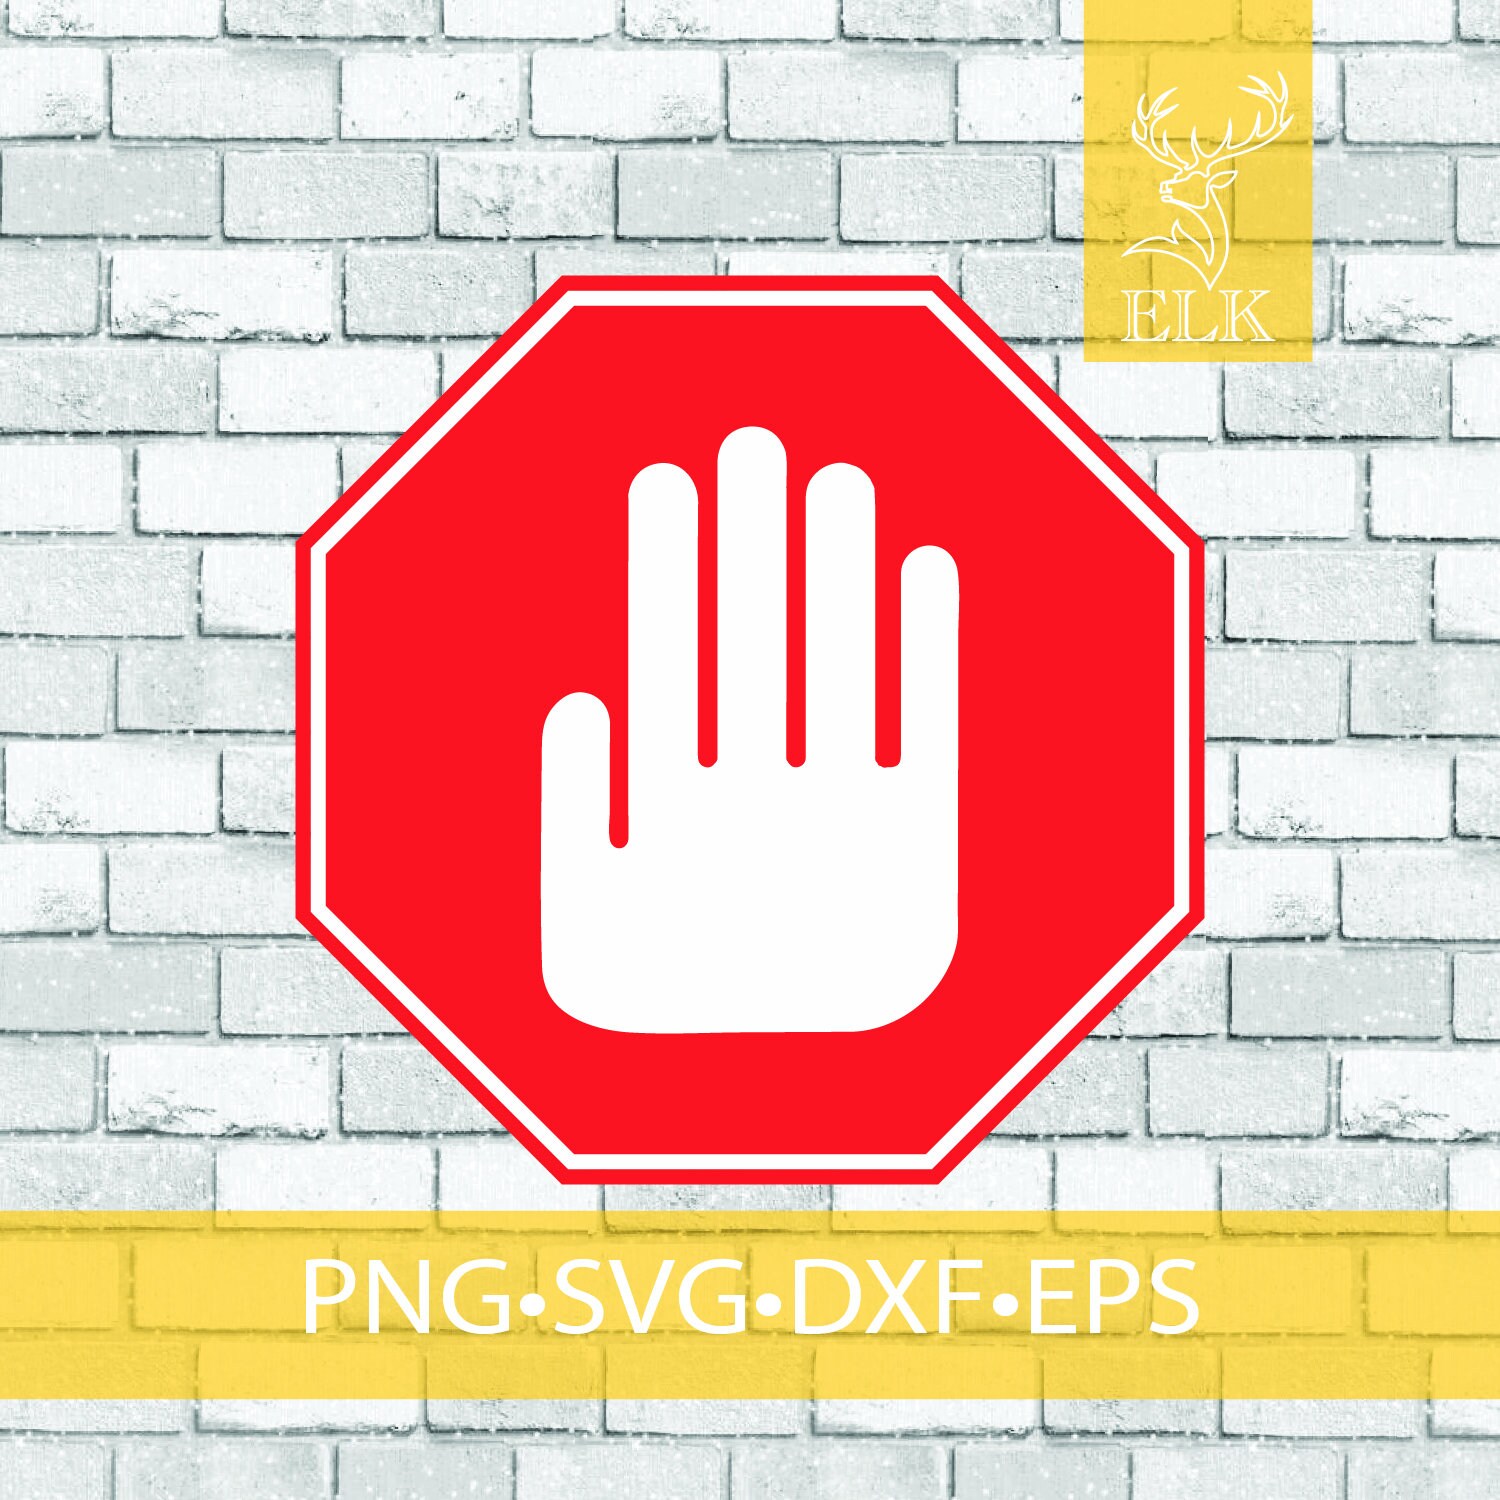 Stop hand, Hand forbidden sign, no entry, do not touch, do not push,  borders closed svg, png, jpg, eps, pdf, clipart, vector